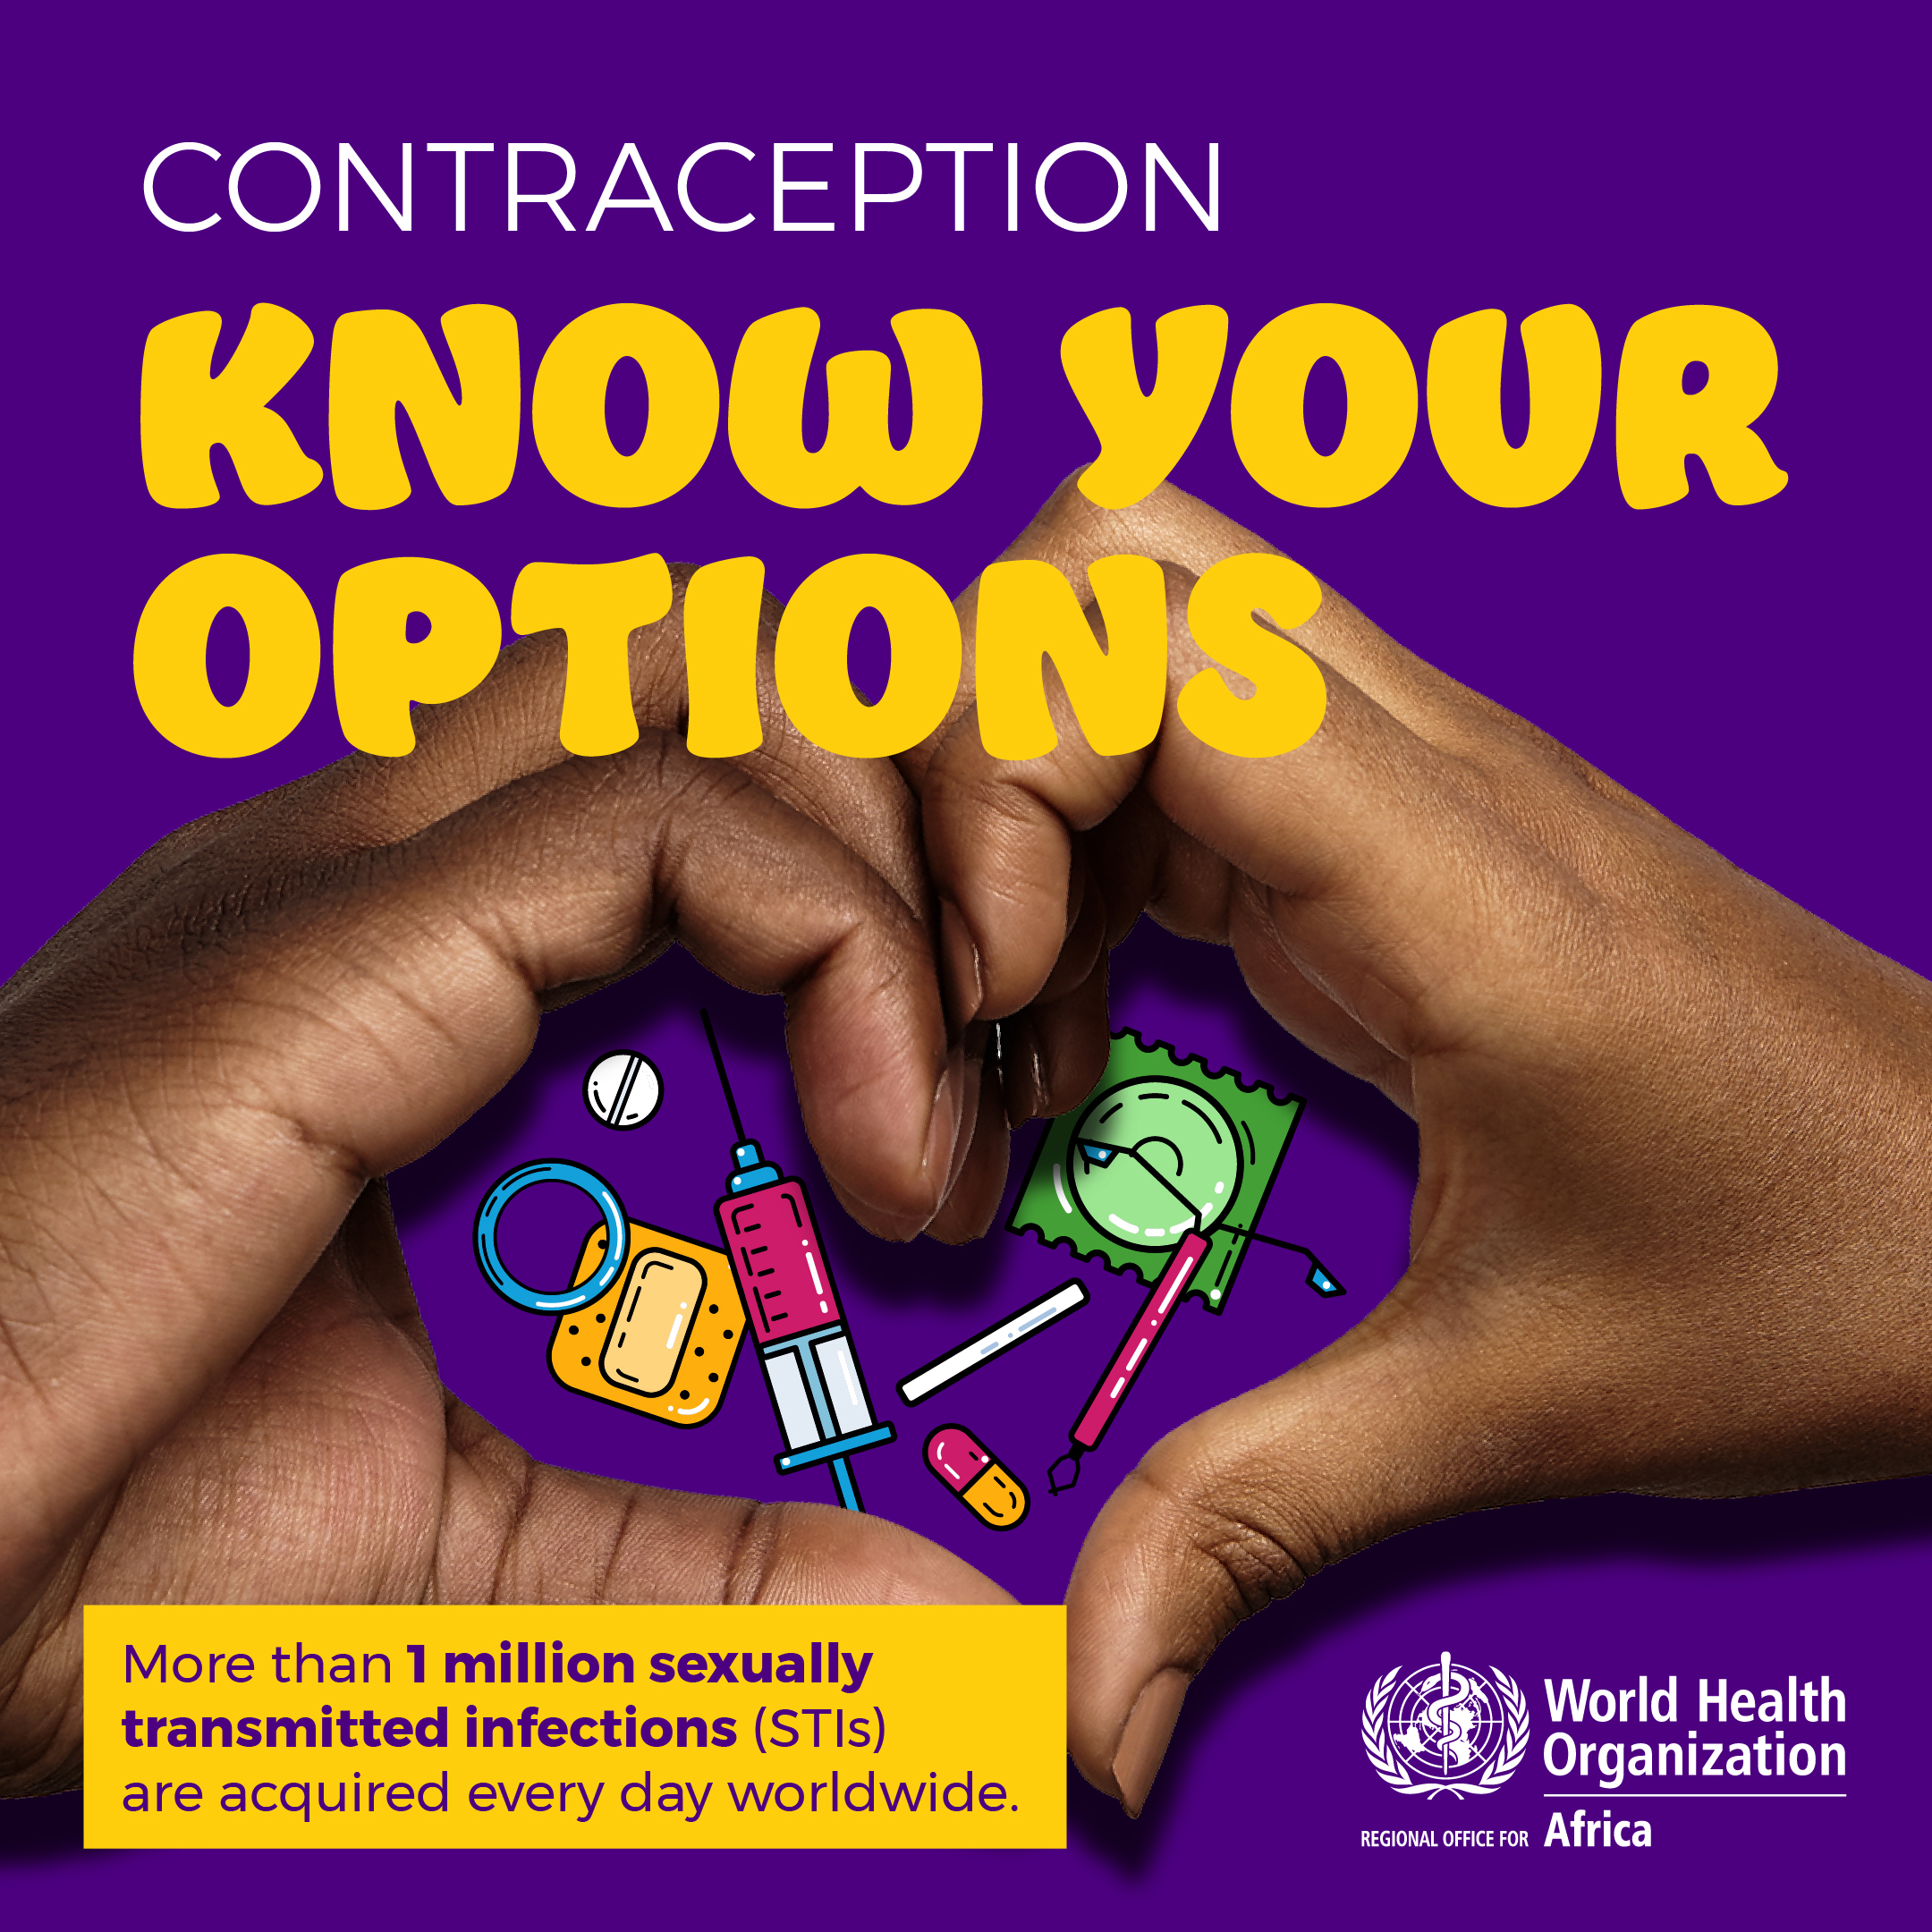 World Contraception Day and International Safe Abortion Day WHO